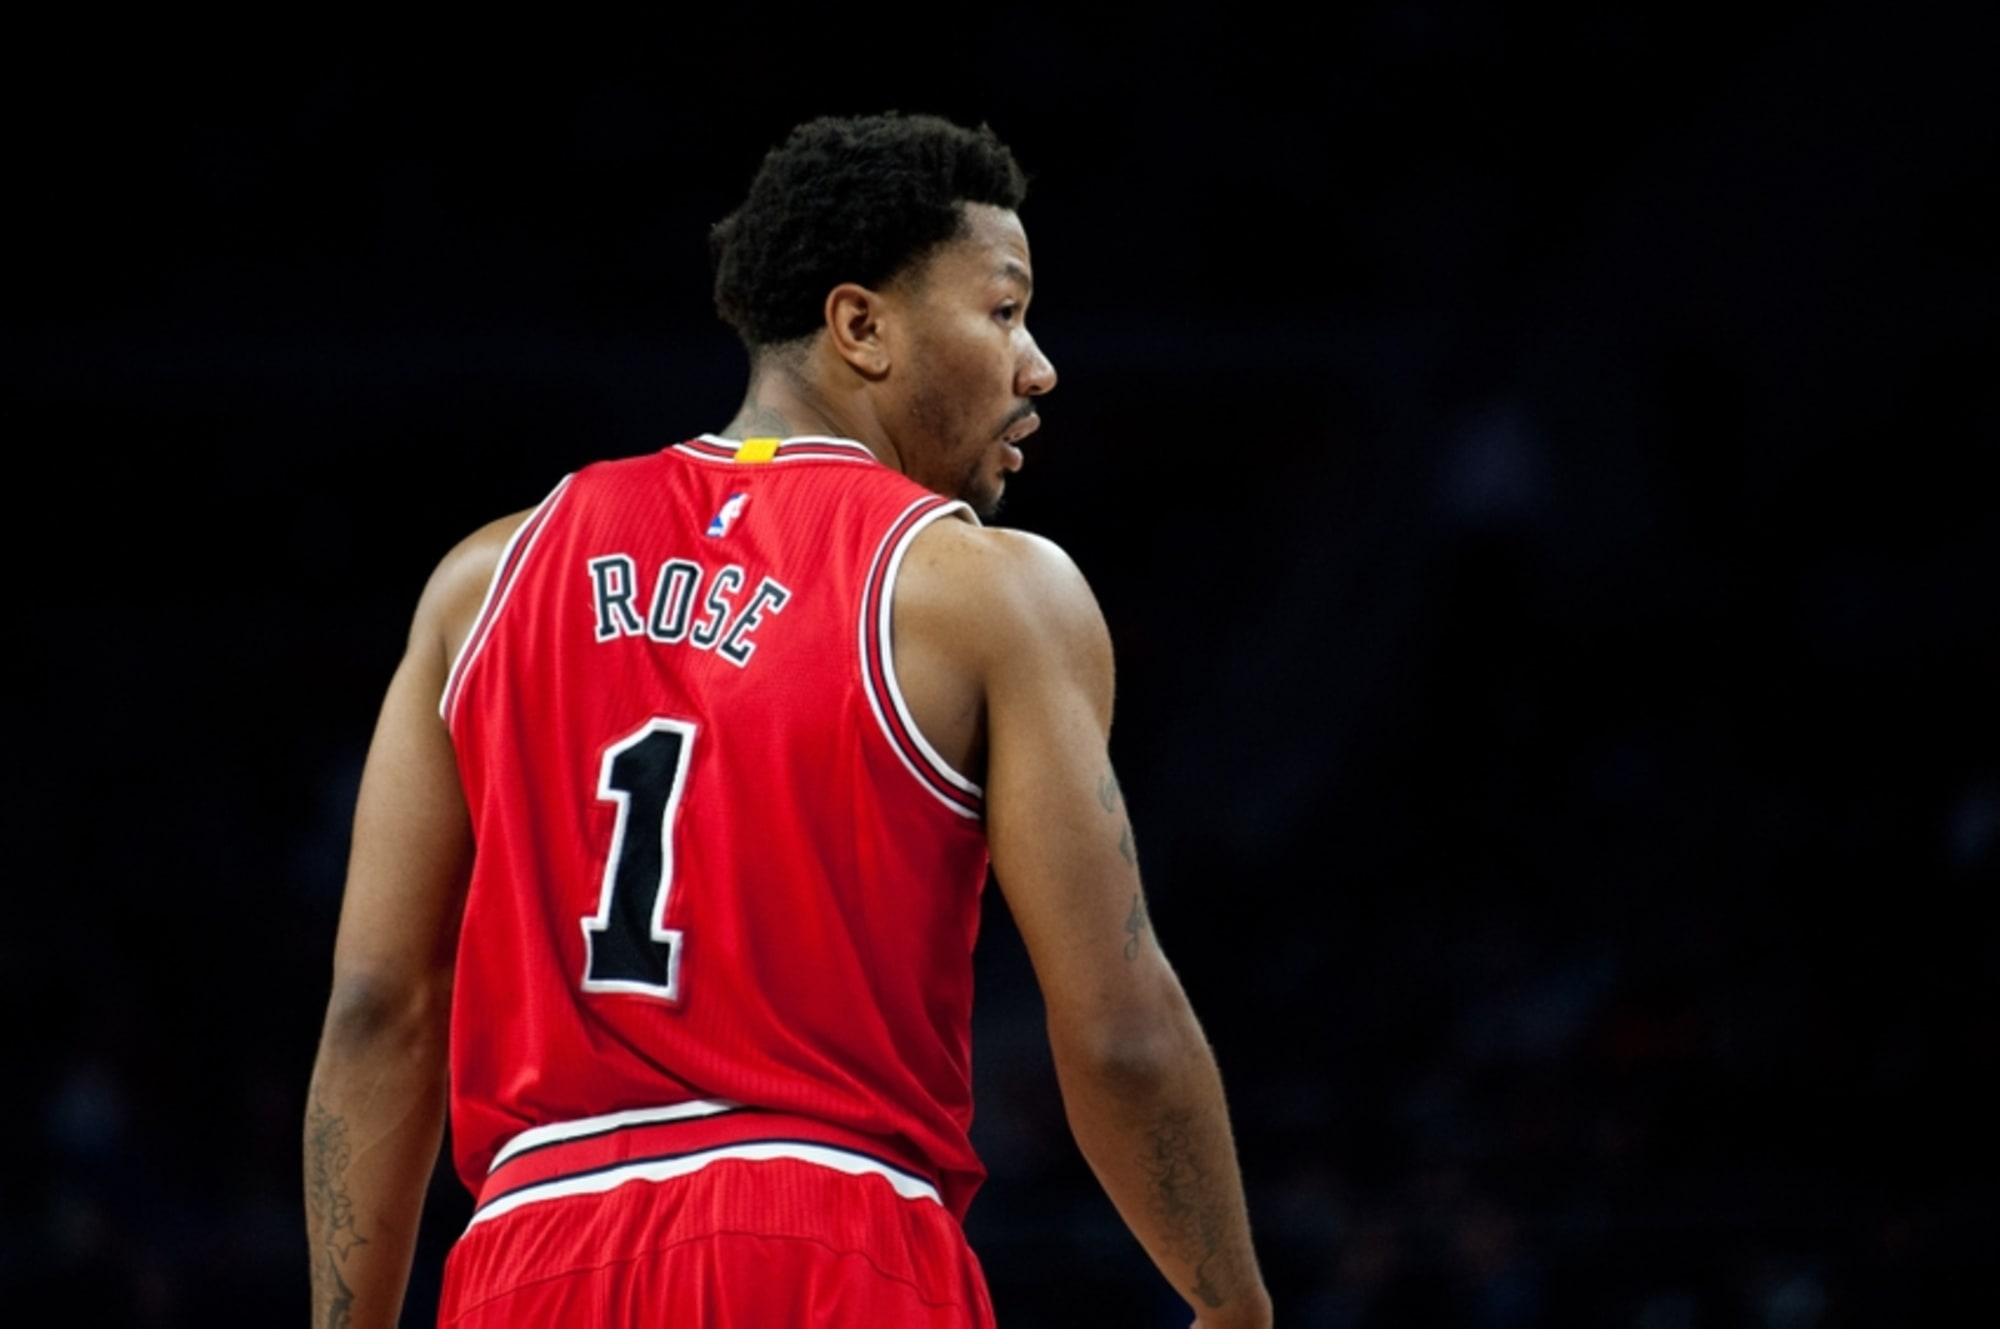 Rose 2nd overall on NBA's global list of top-selling jerseys